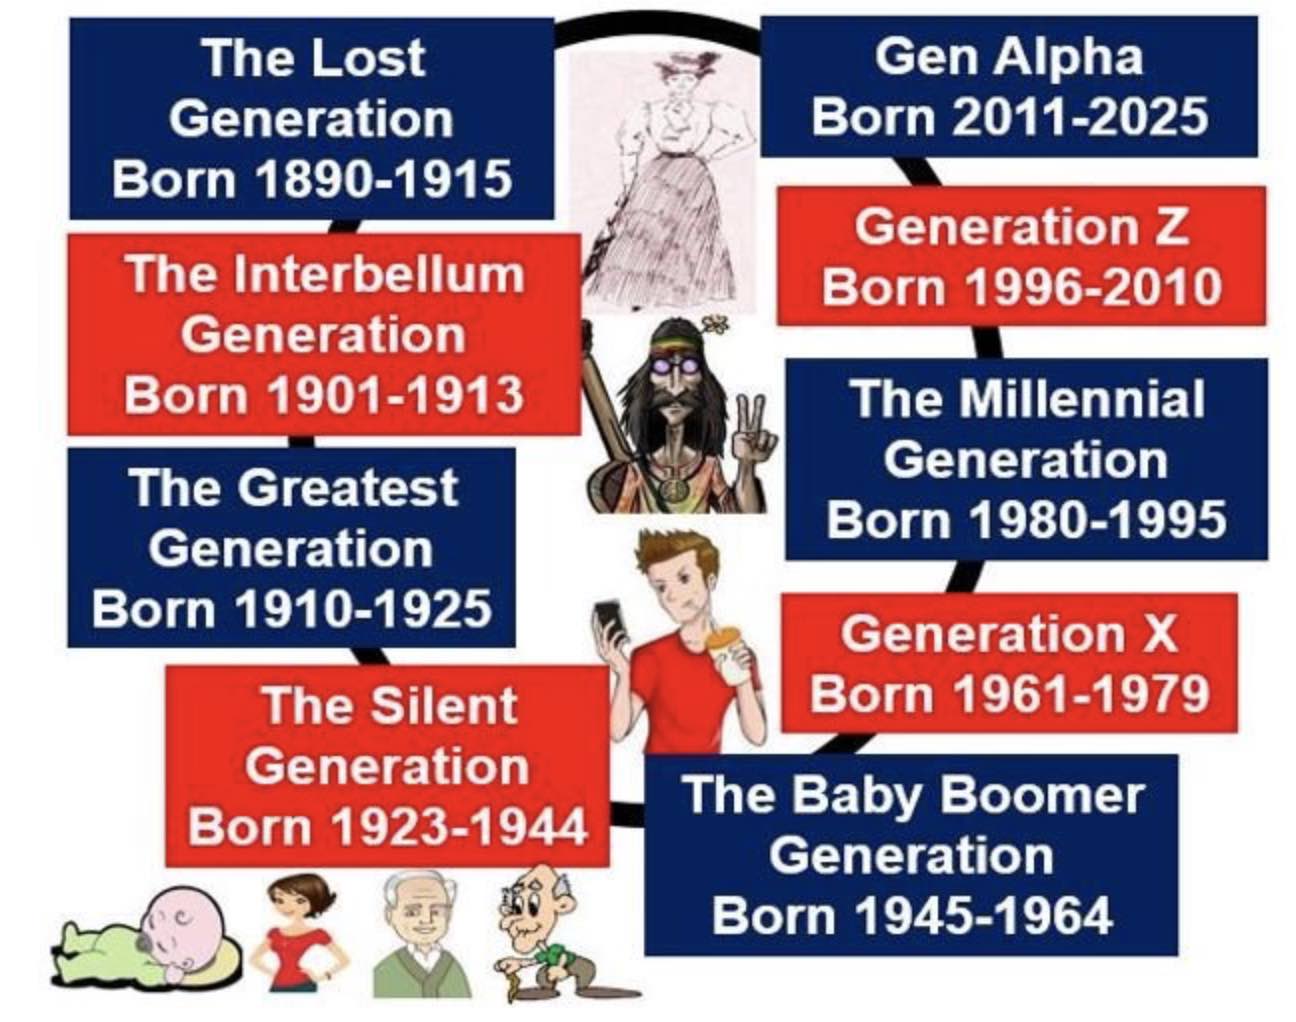 Generation meaning. If i was born in 2011 what Generation am i?.